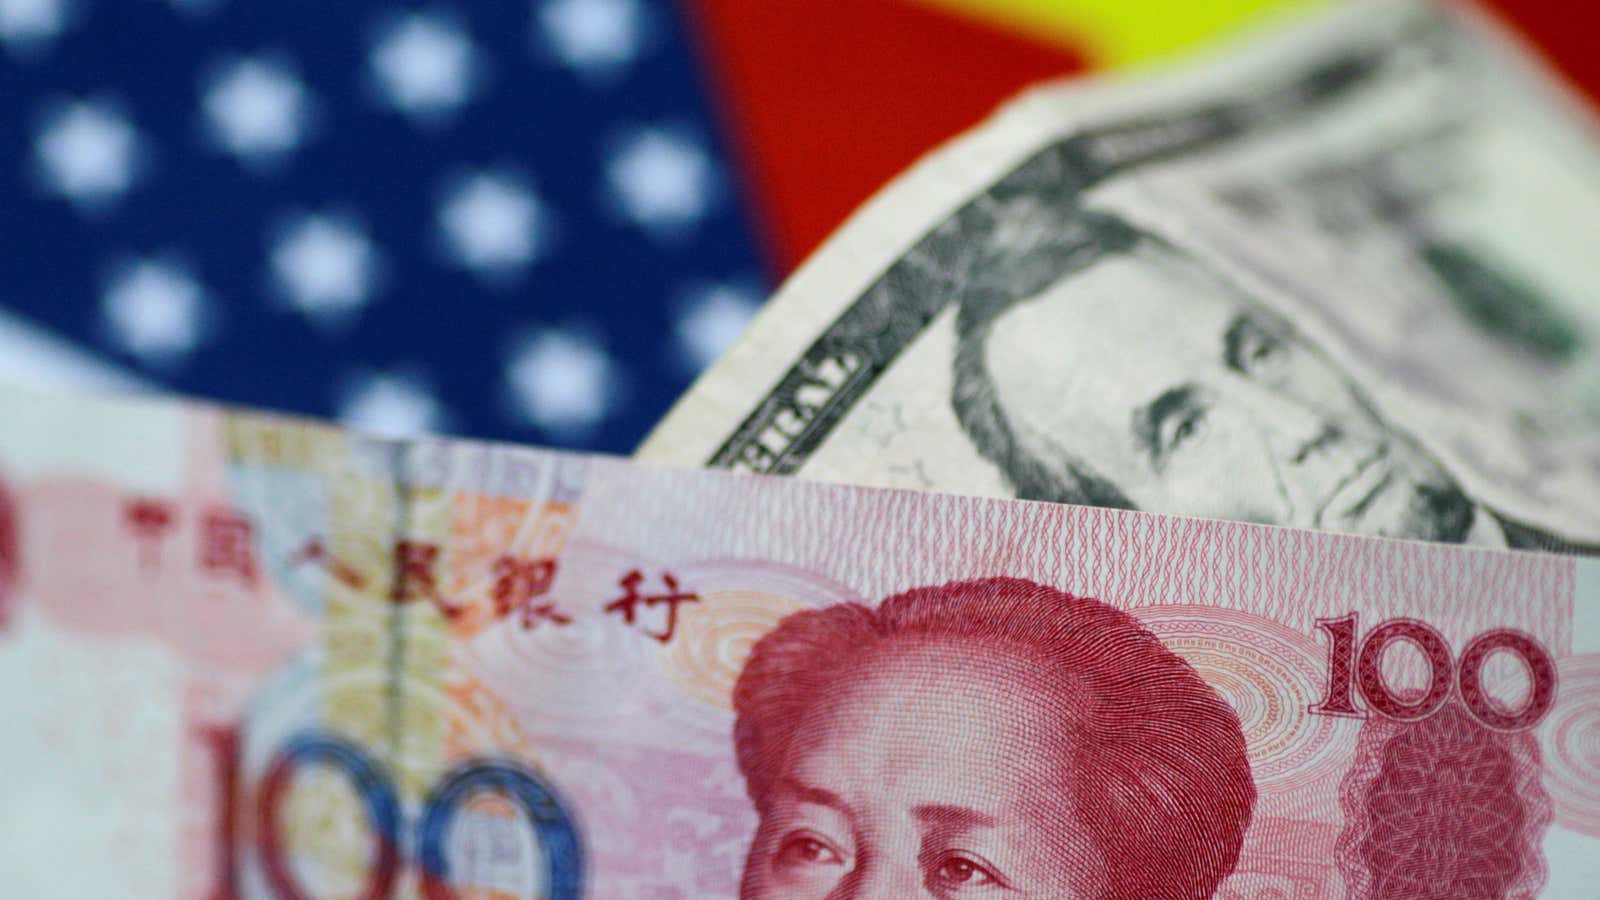 Could China turn a trade war into a currency war?